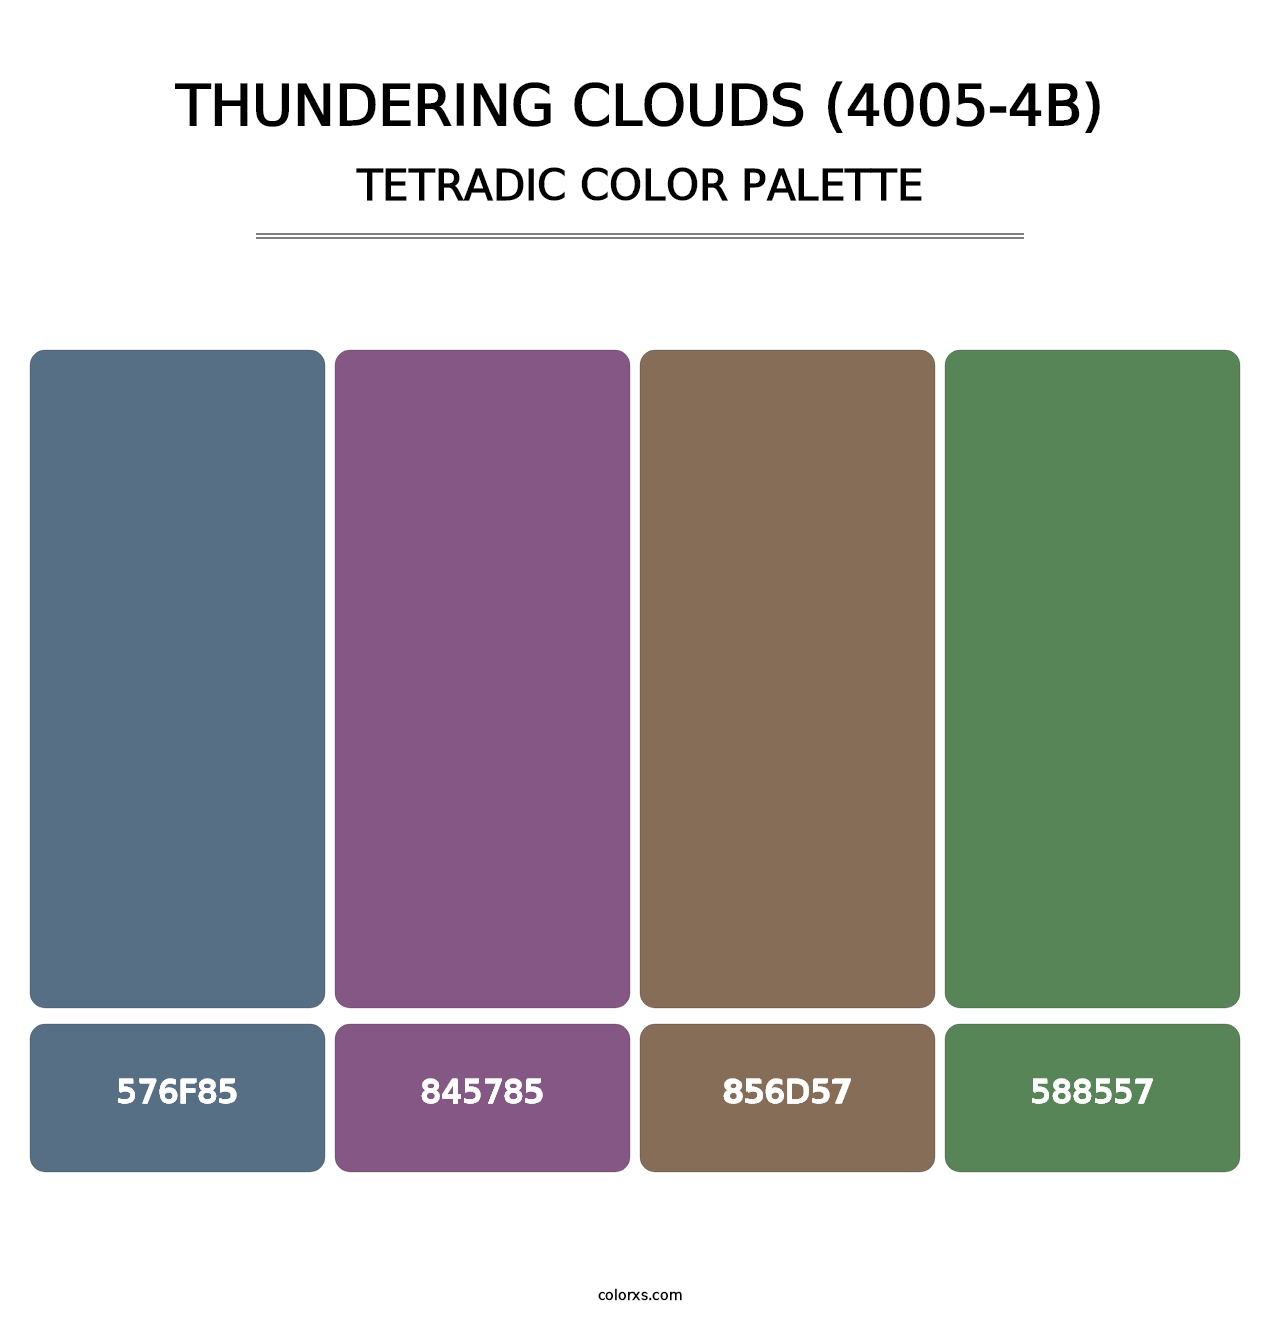 Thundering Clouds (4005-4B) - Tetradic Color Palette